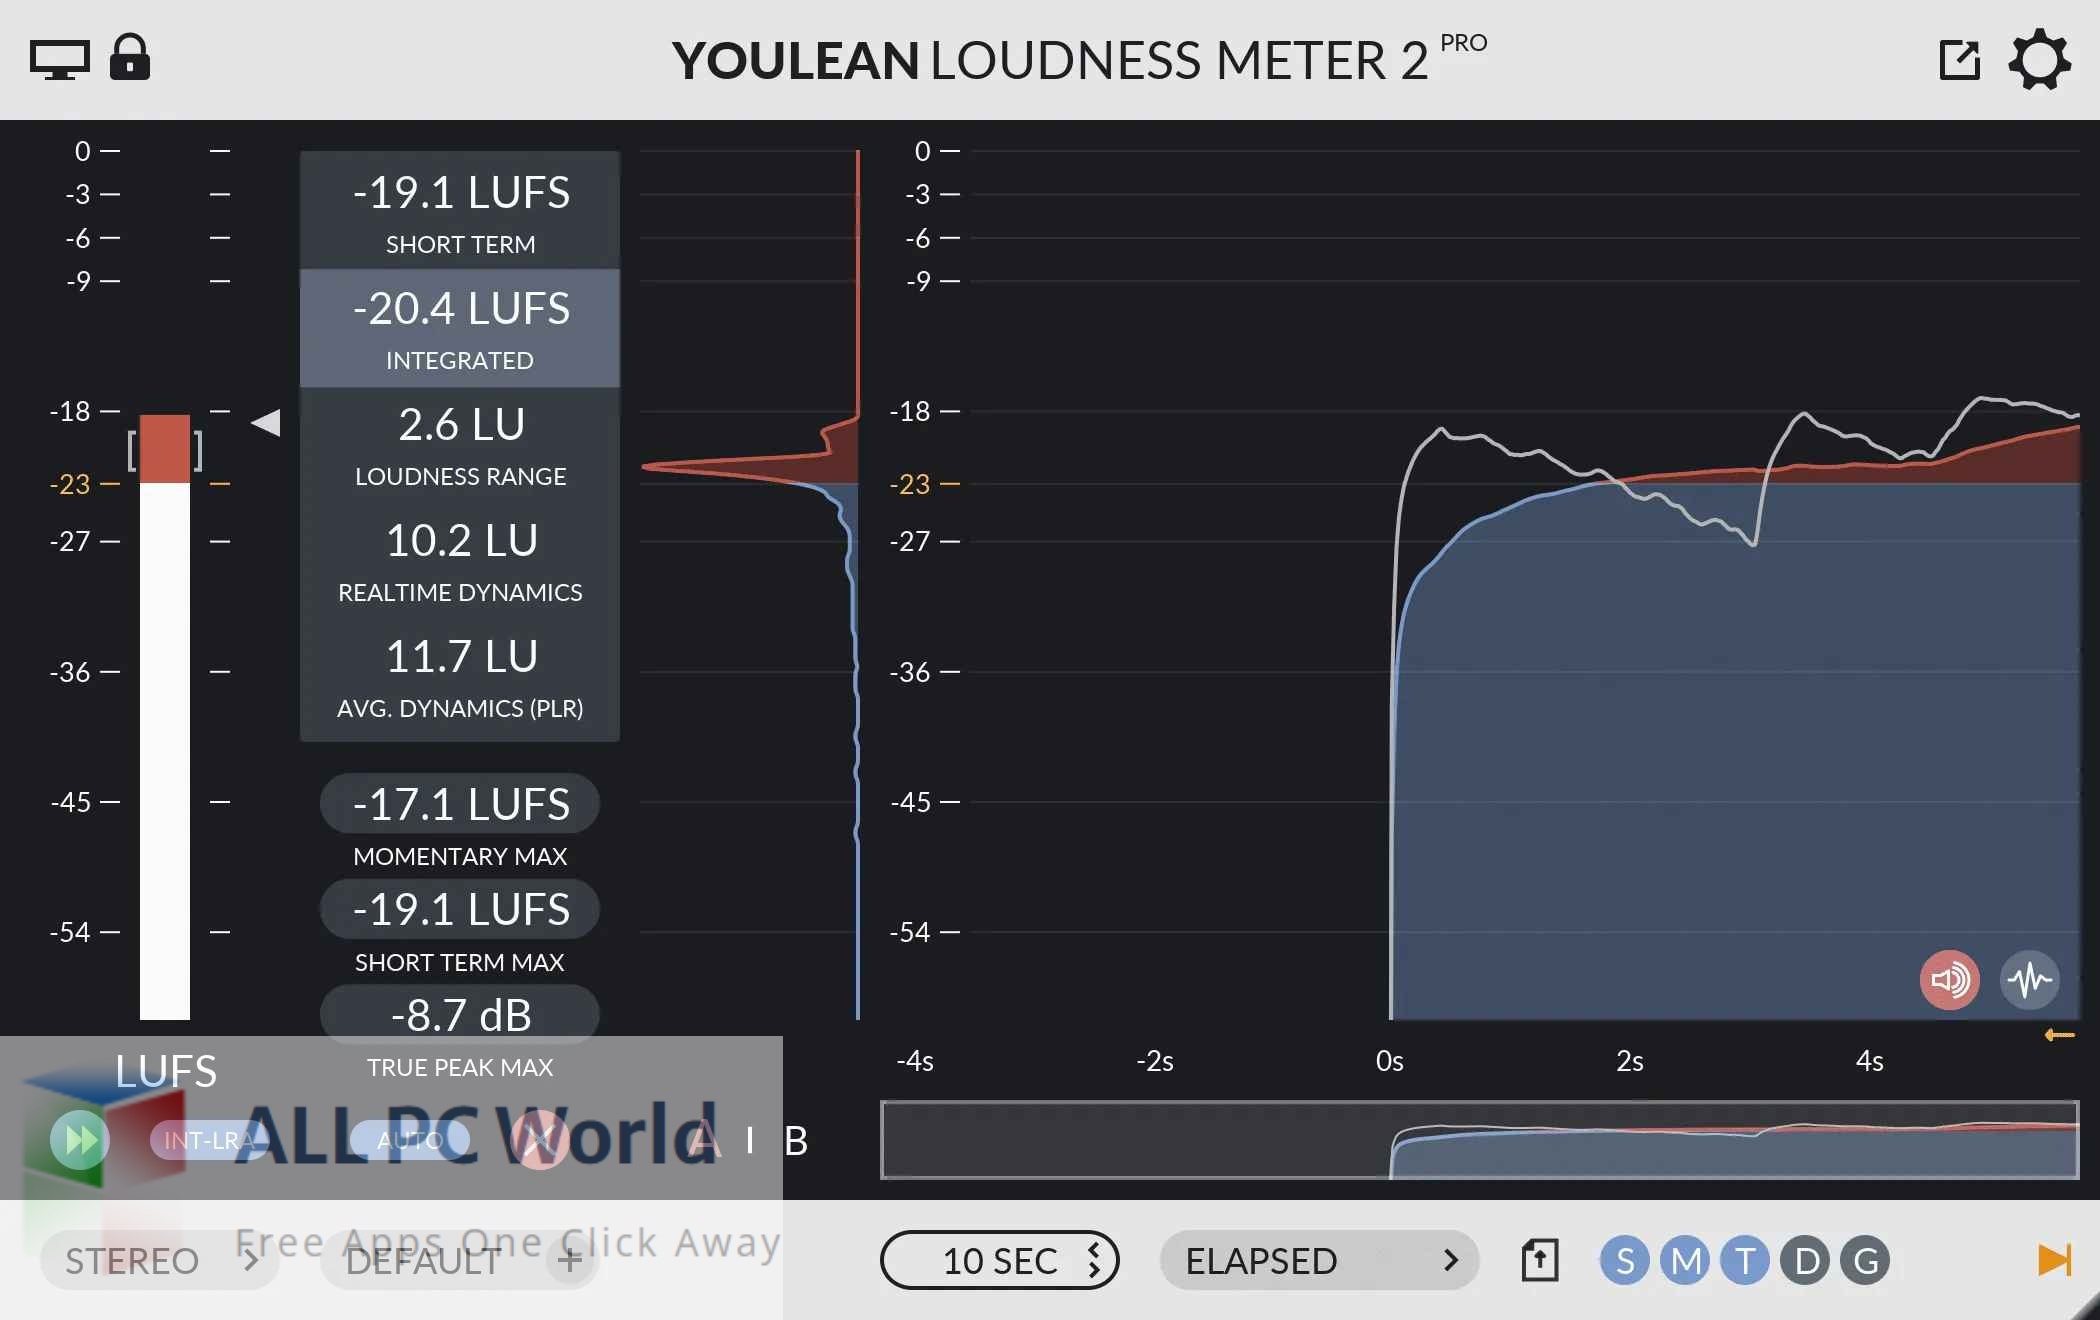 Youlean Loudness Meter 2 PRO v2 Free Download